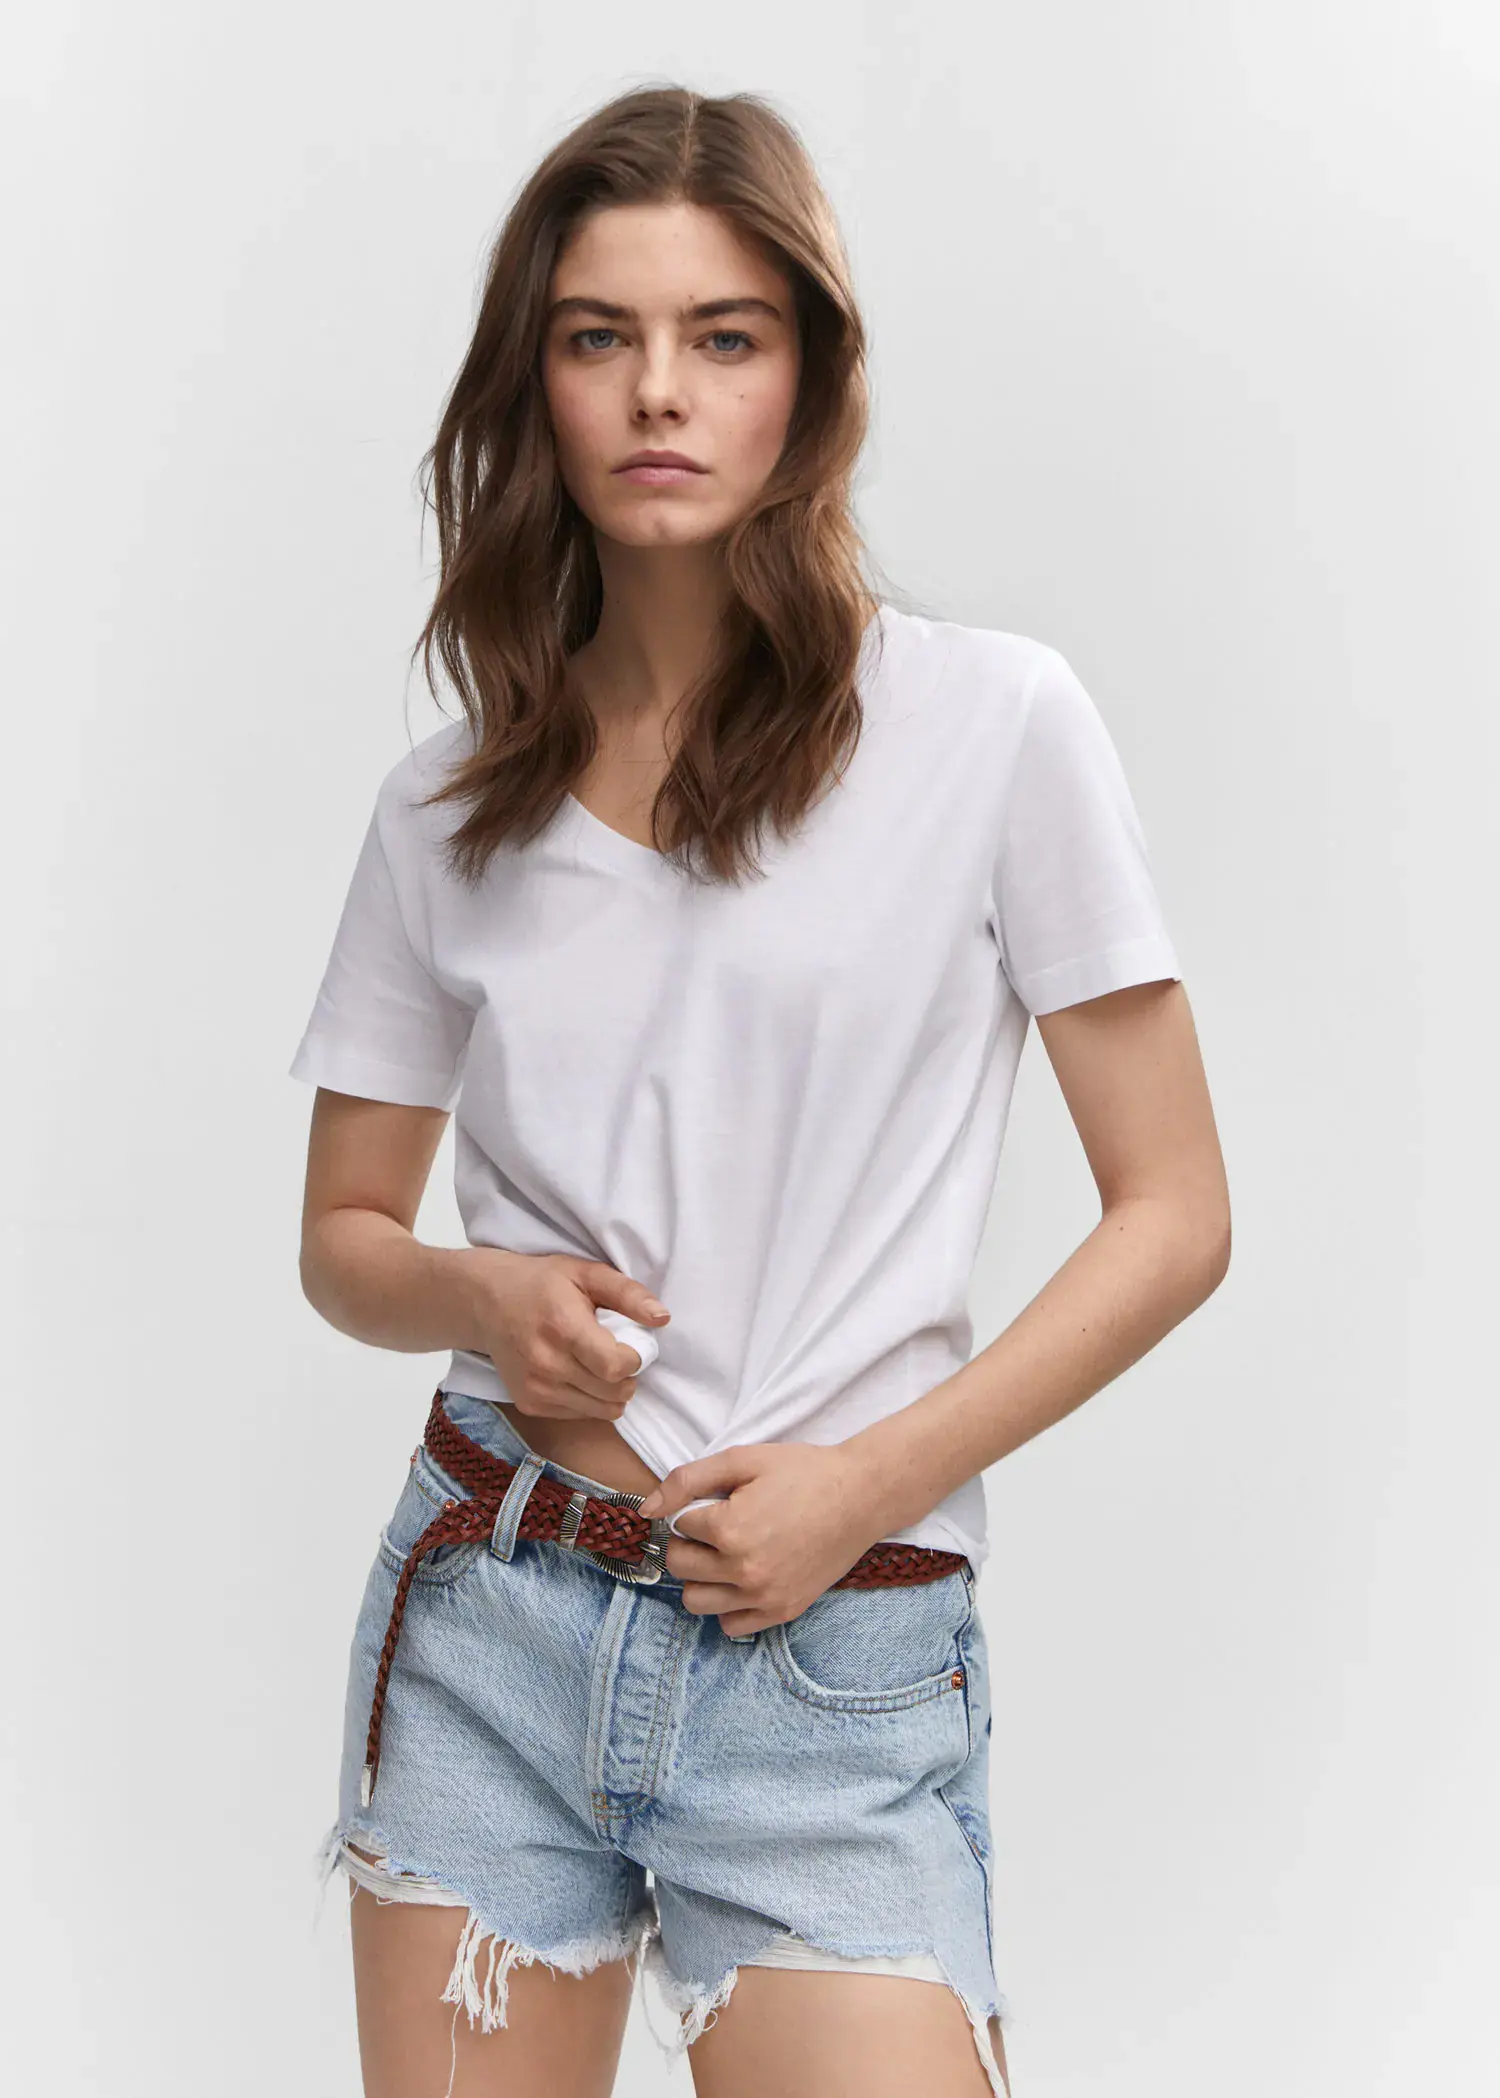 Mango V-neck cotton T-shirt. a woman in a white shirt and jeans. 